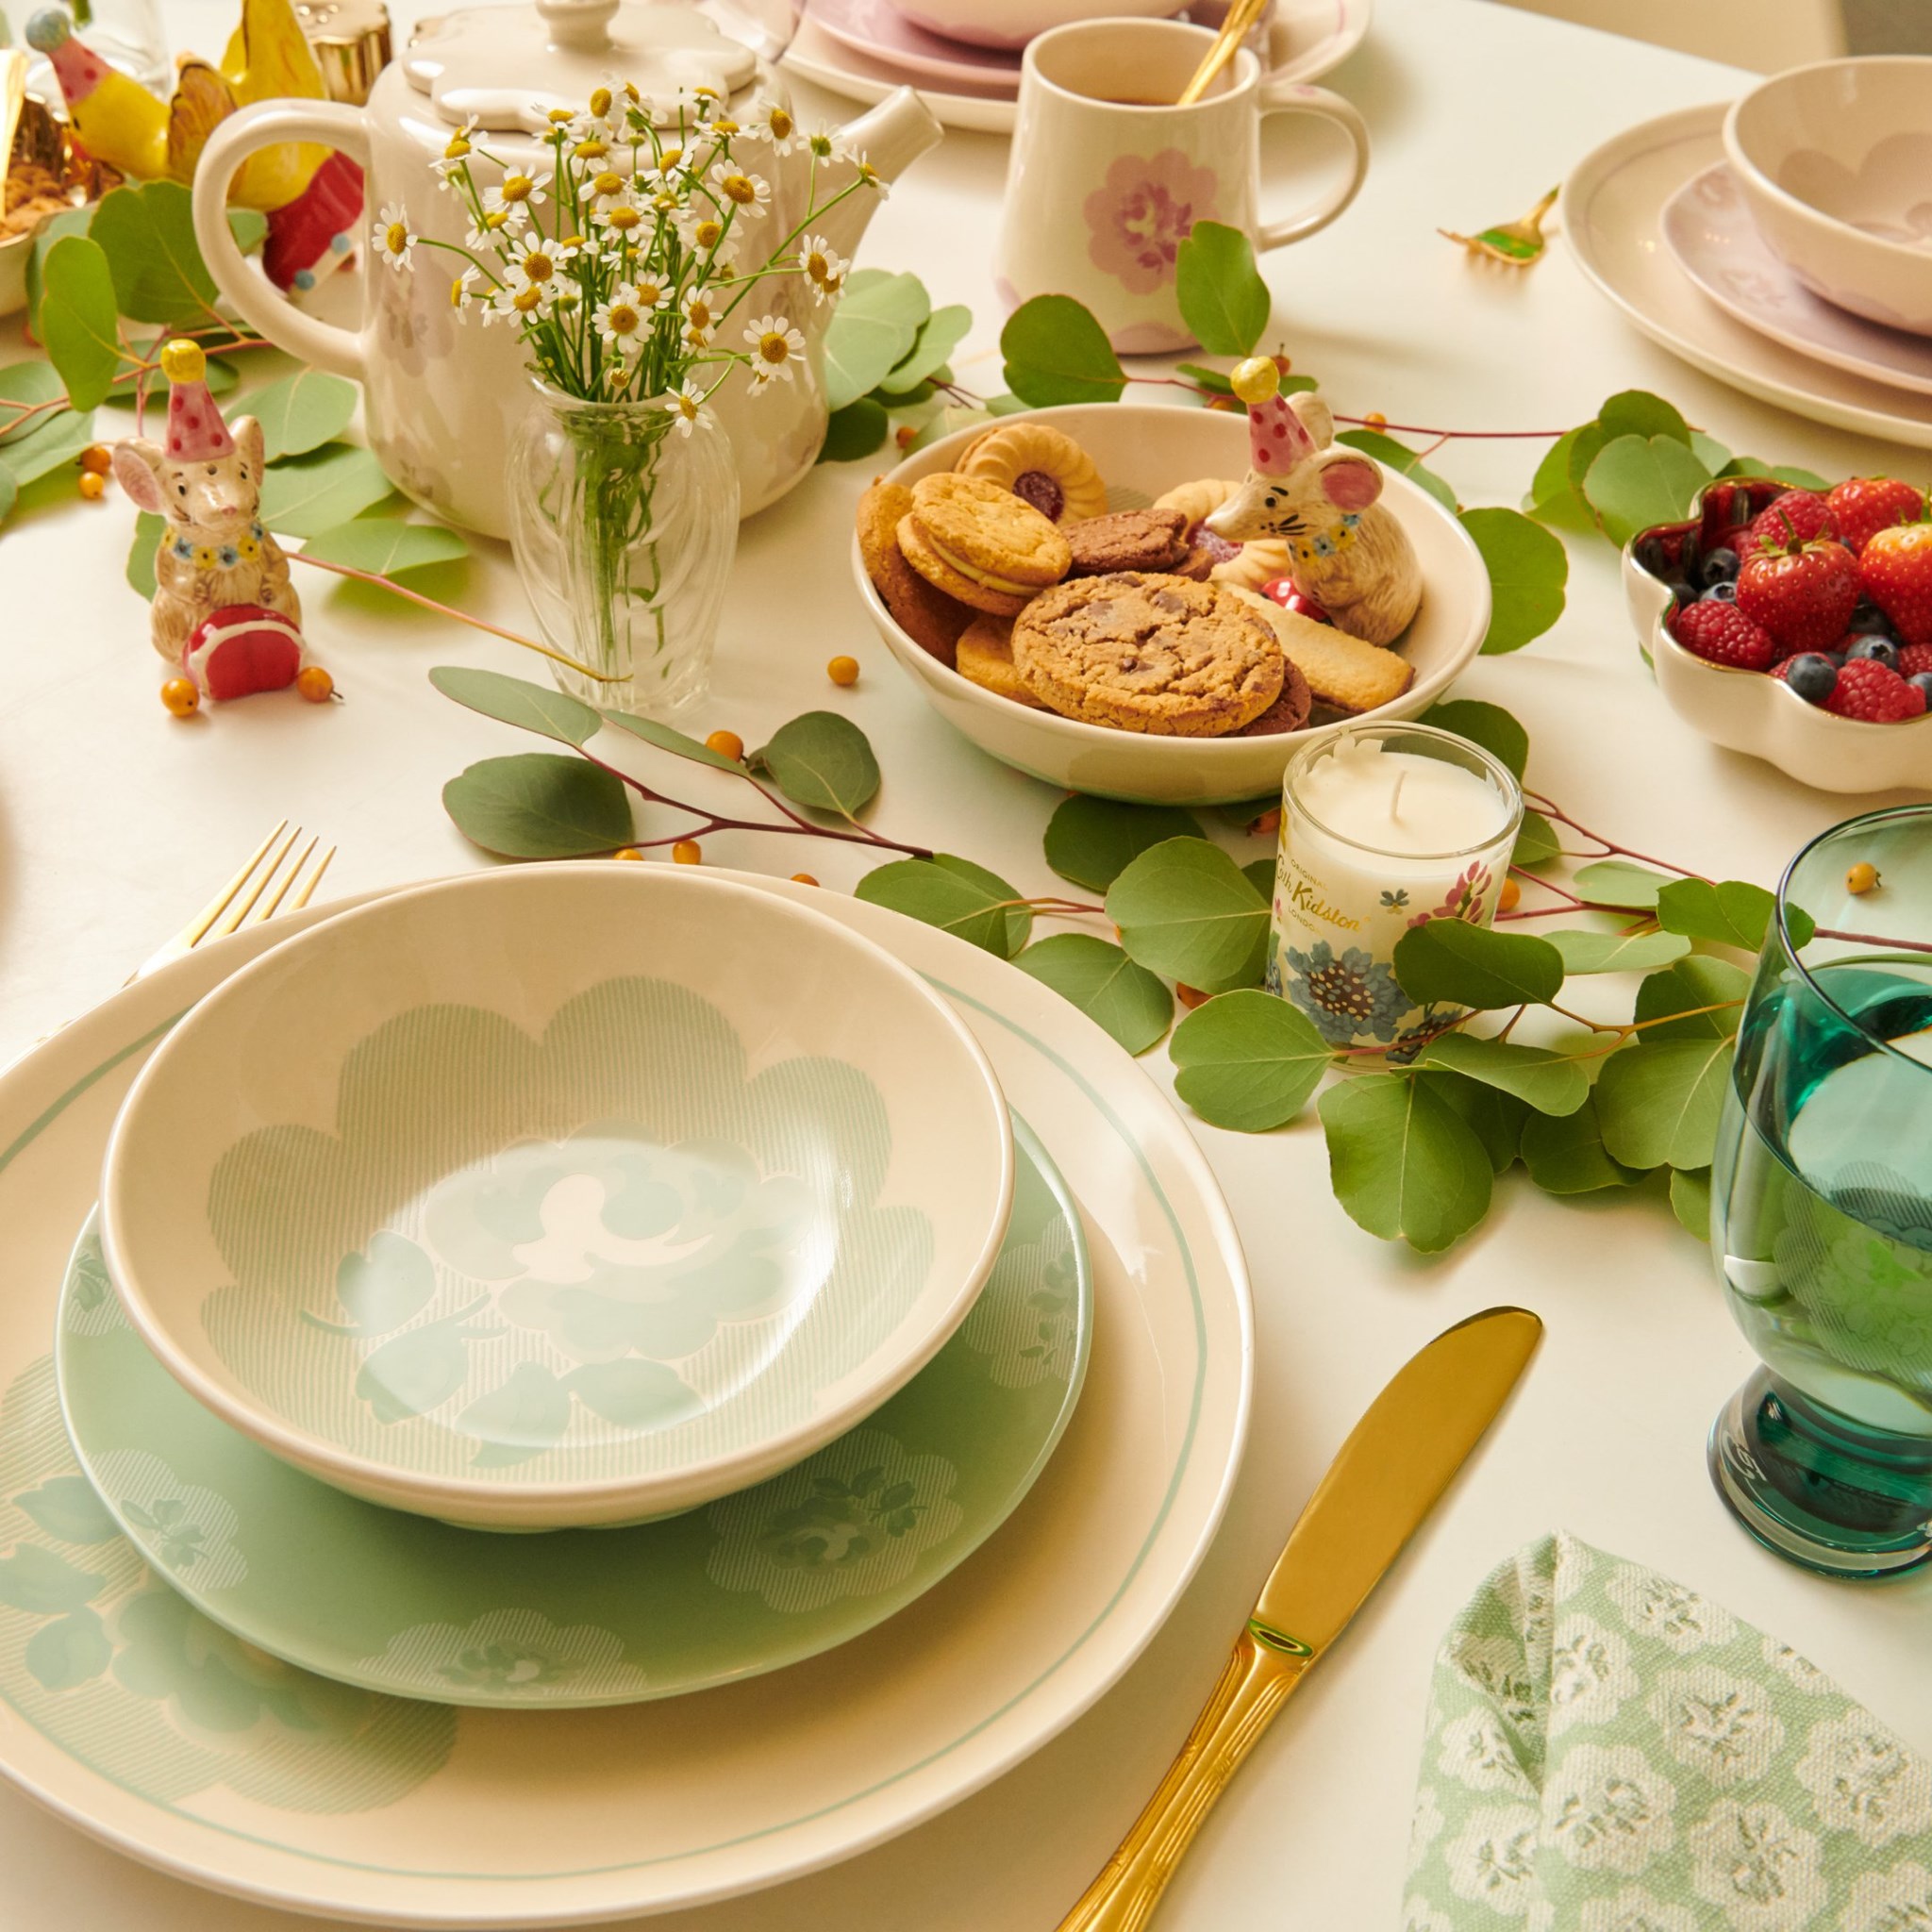 【Cath Kidston Easter Cooking Essentials🍳】